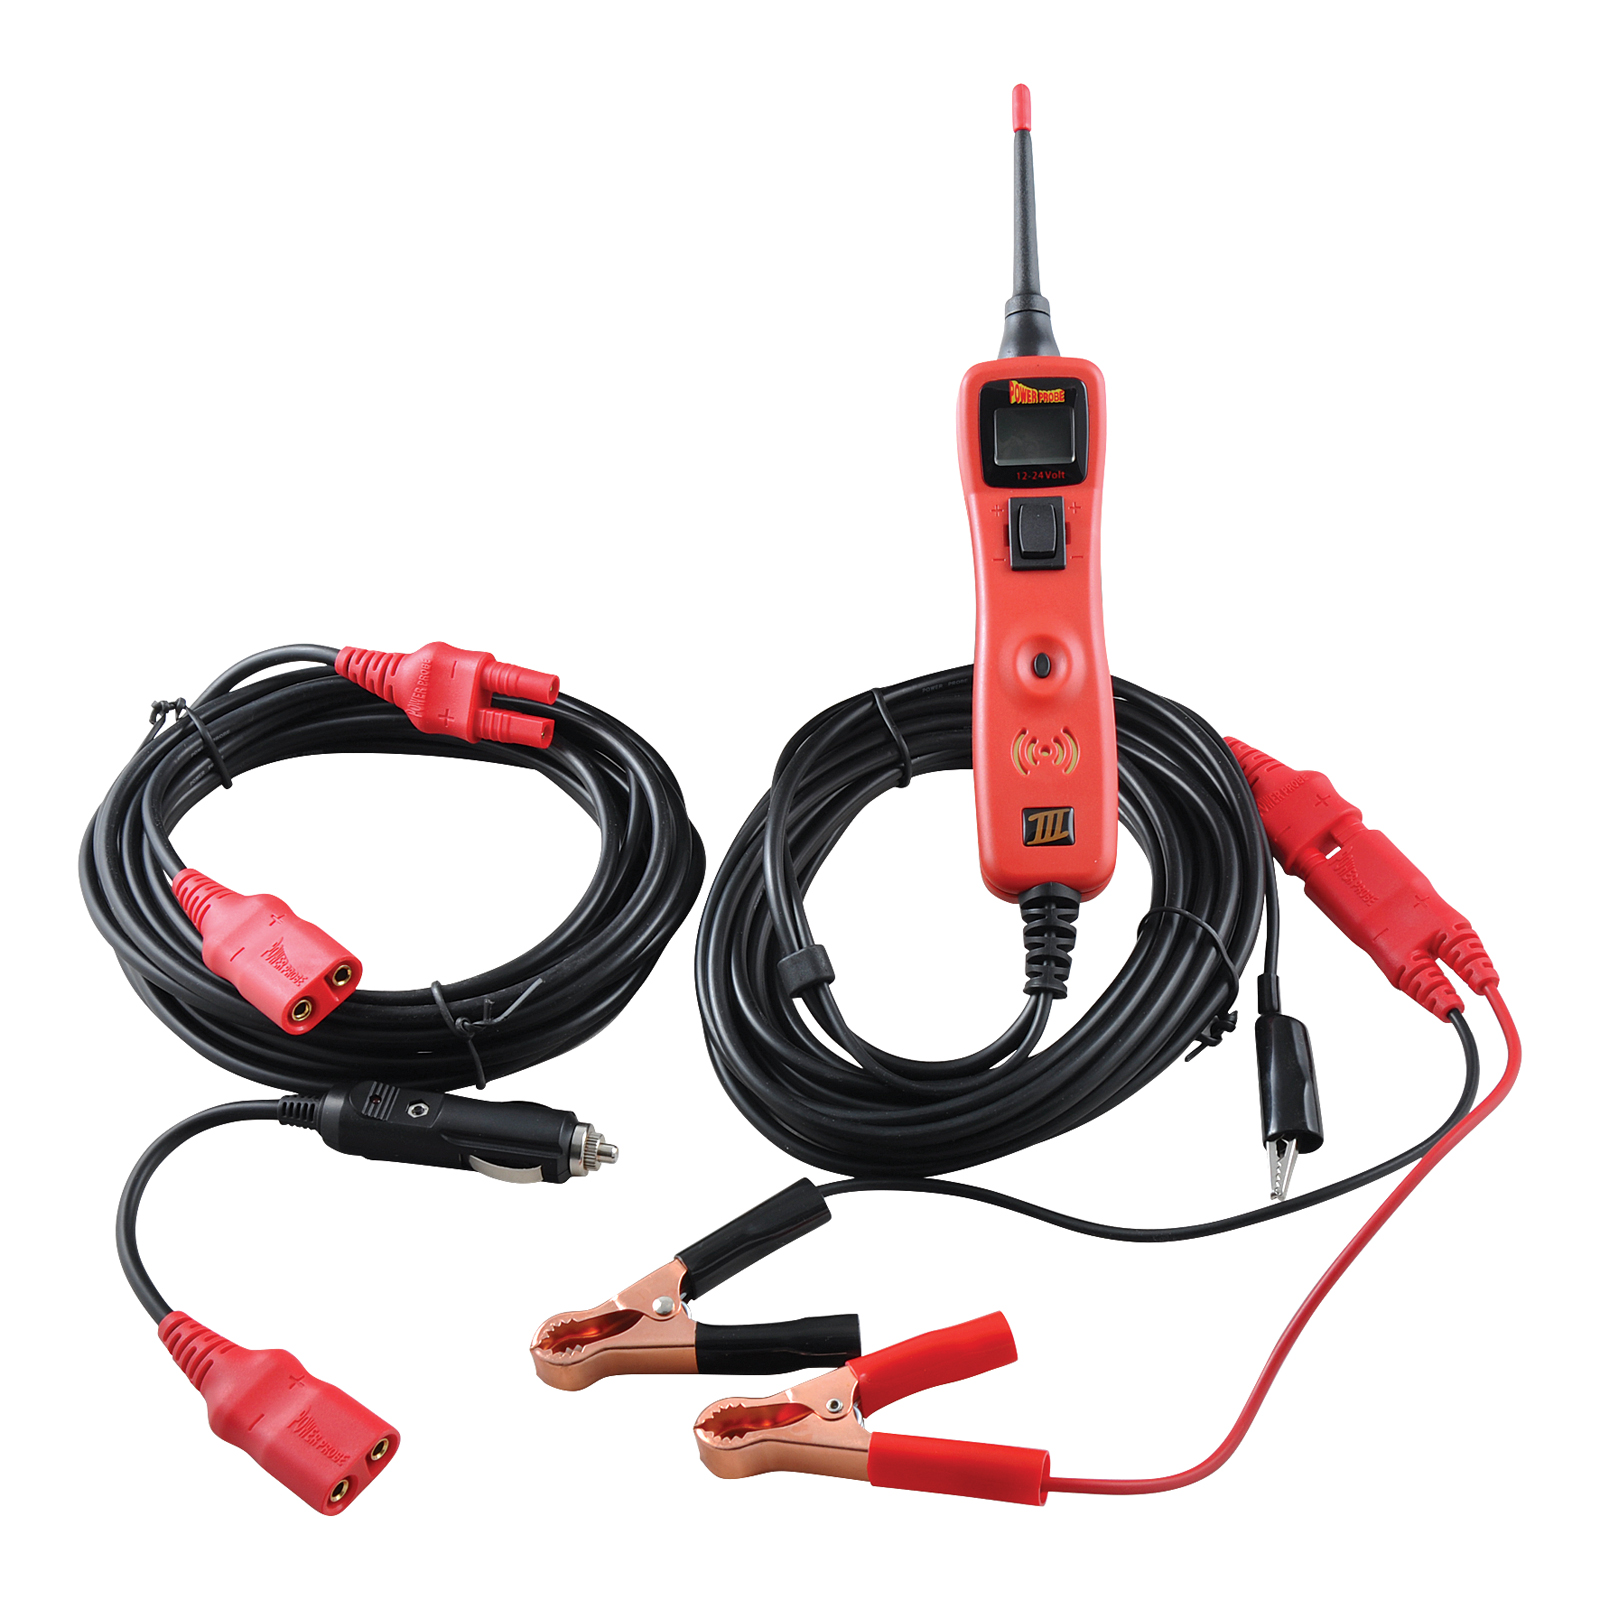 PP319FTC with a Keychain Light Camo Power Probe III with Case & Accessories Car Automotive Diagnostic Test Tool, Digital Volt Meter, ACDC Current Resistance Circuit Tester 